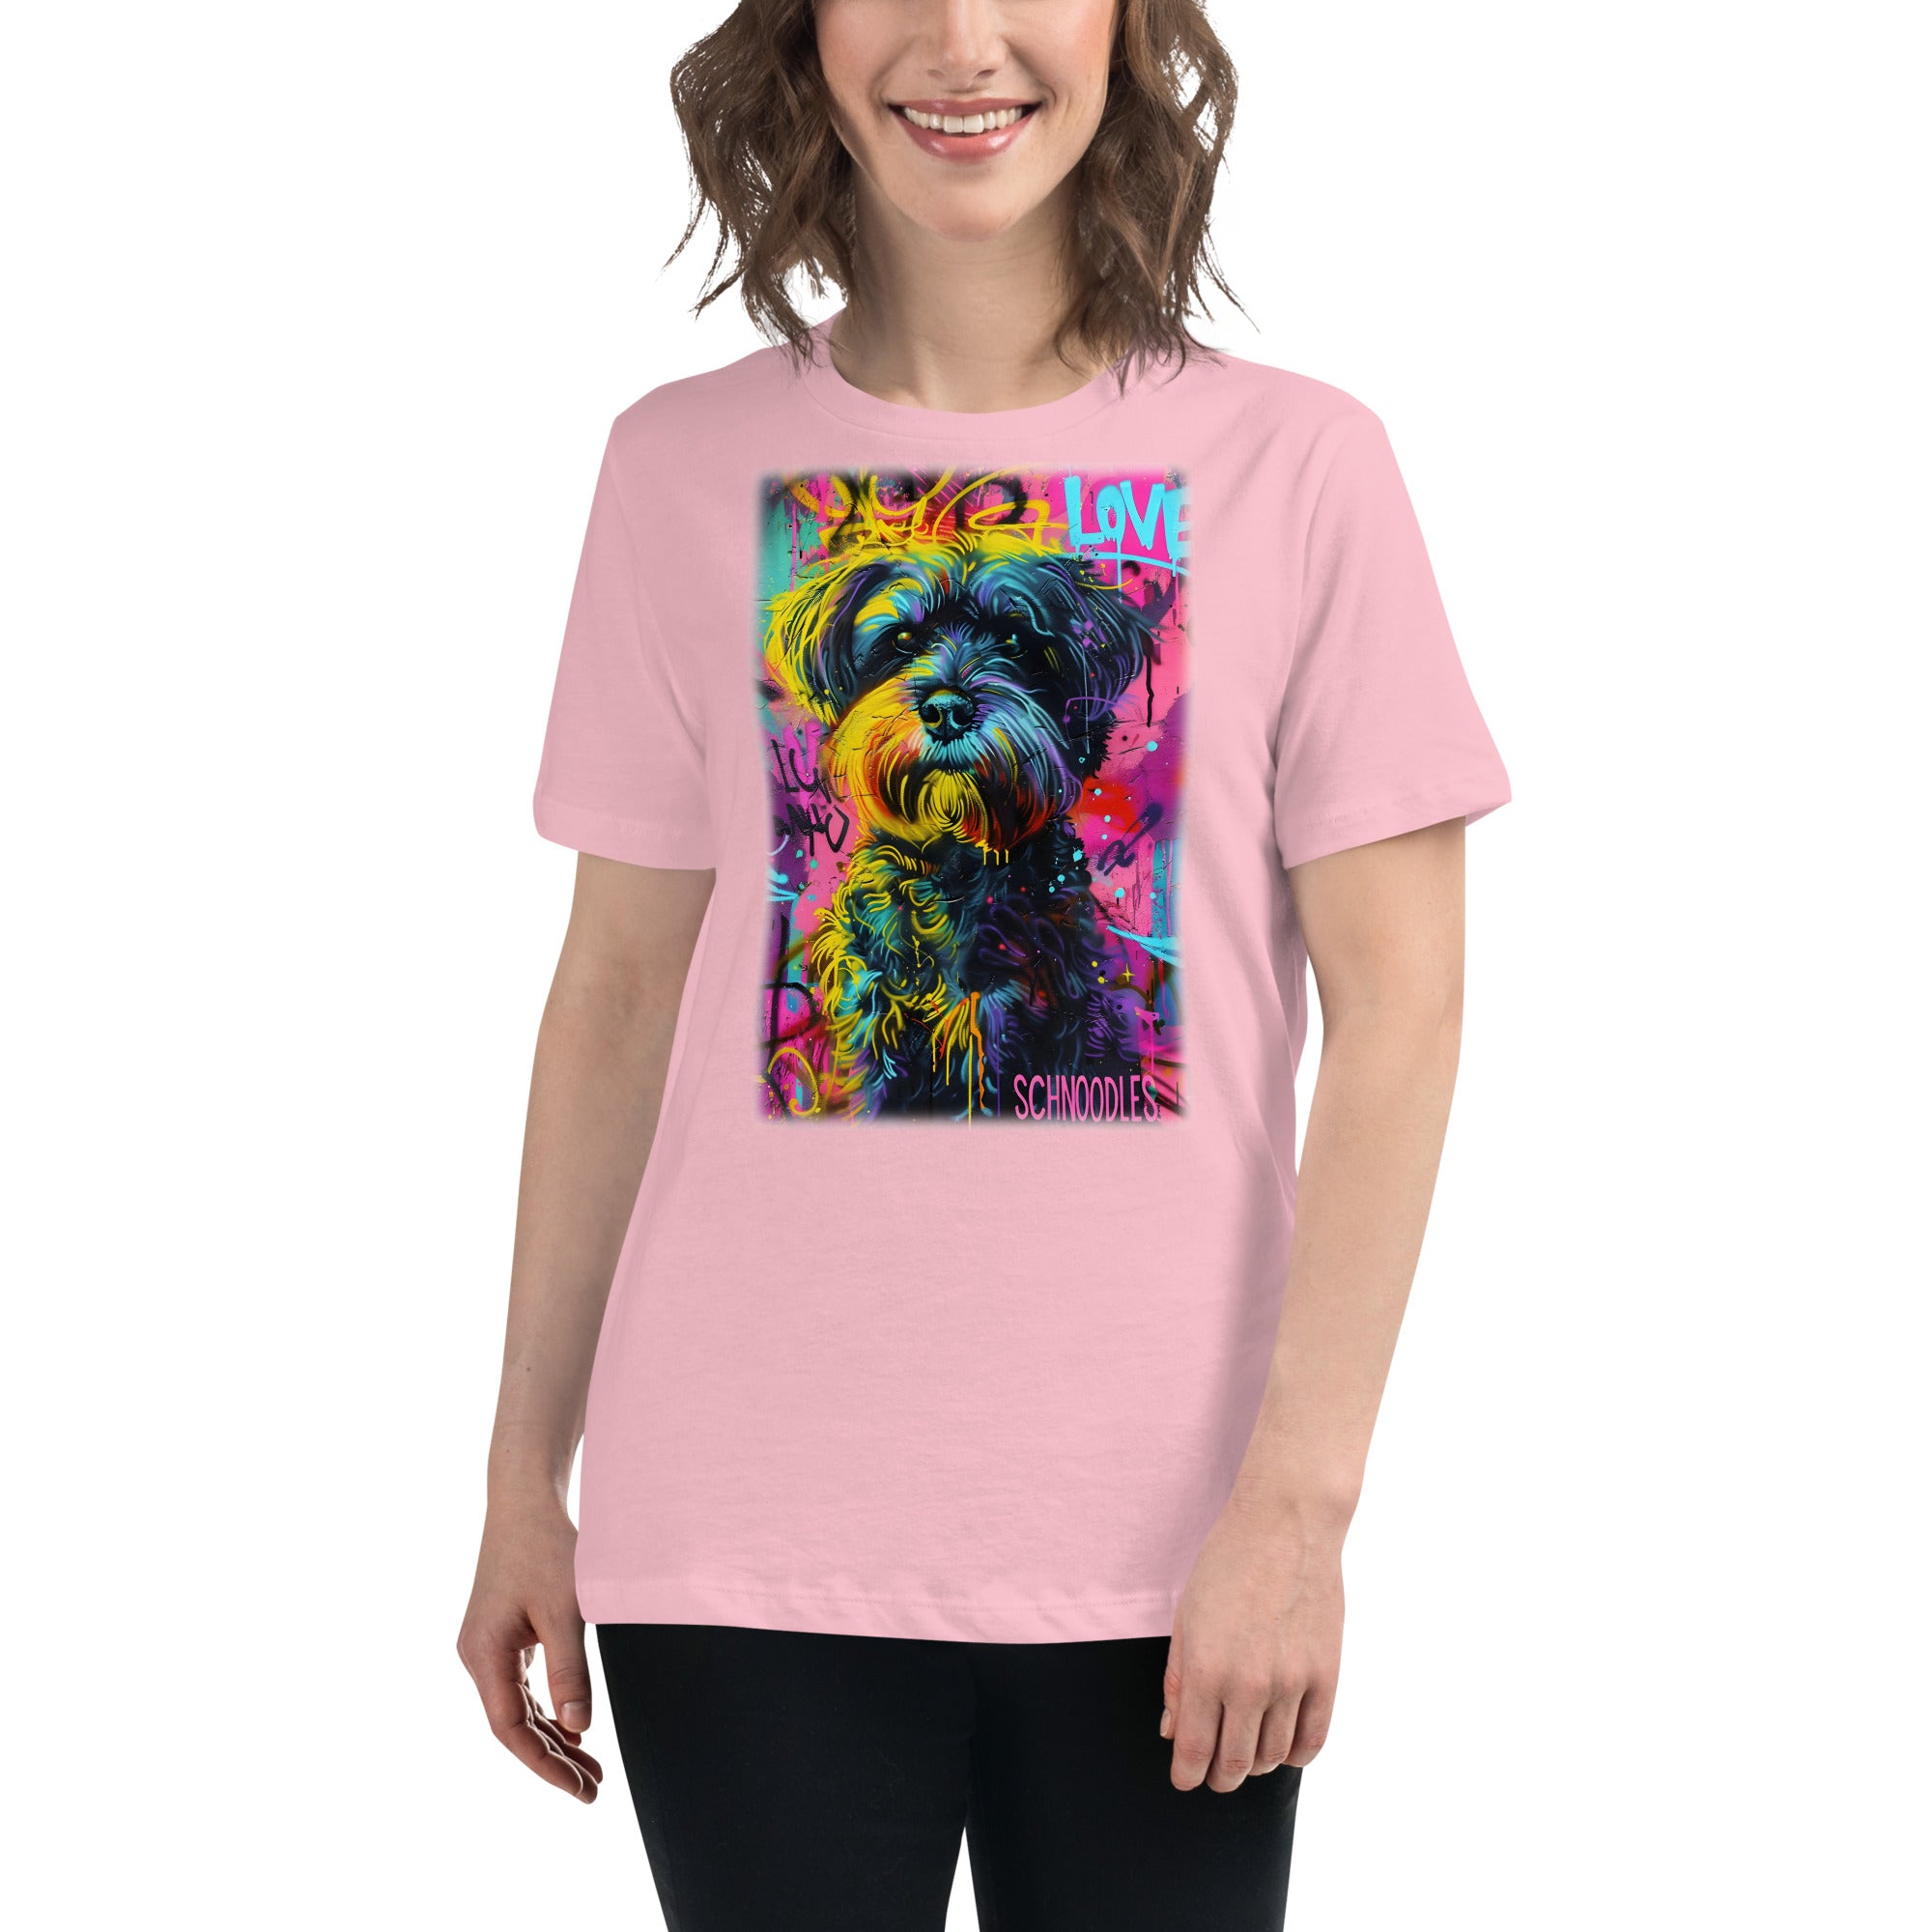 Schnoodle Women's Relaxed T-Shirt